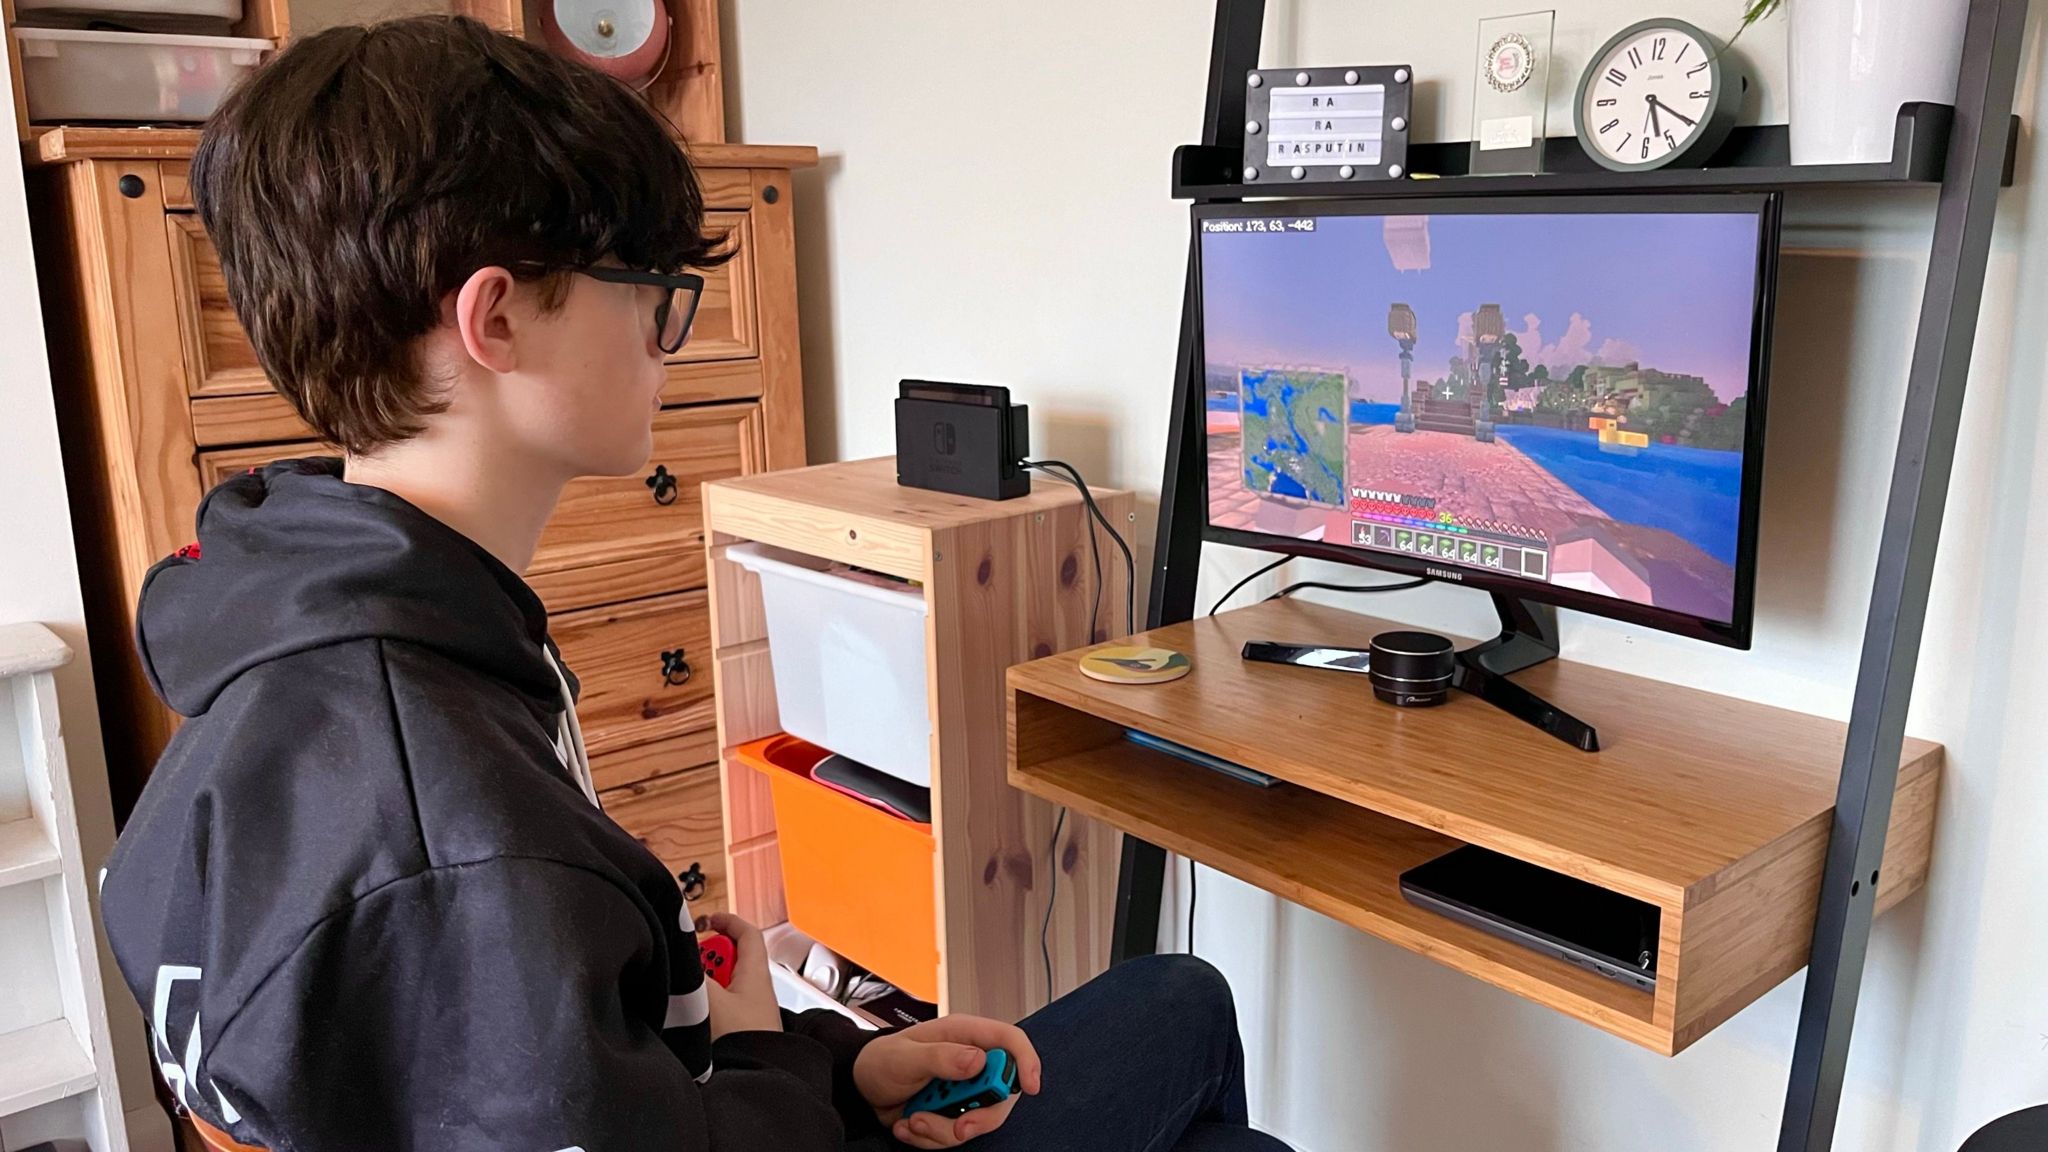 Michael holding a Nintendon Switch controller and looking at a game on a monitor